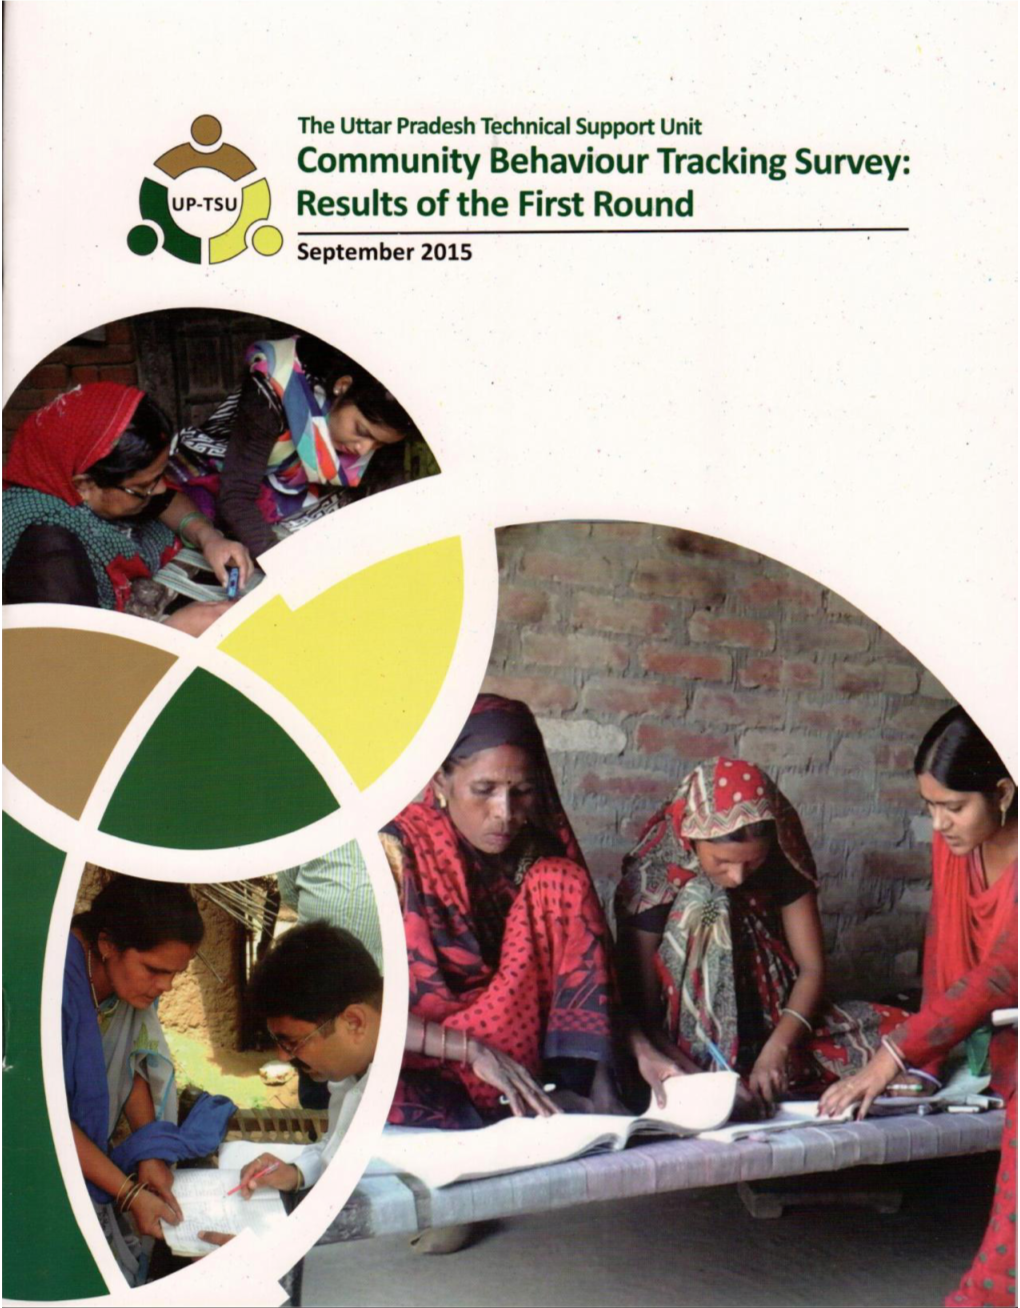 The Uttar Pradesh Technical Support Unit Community Behaviour Tracking Survey: Results of the First Round